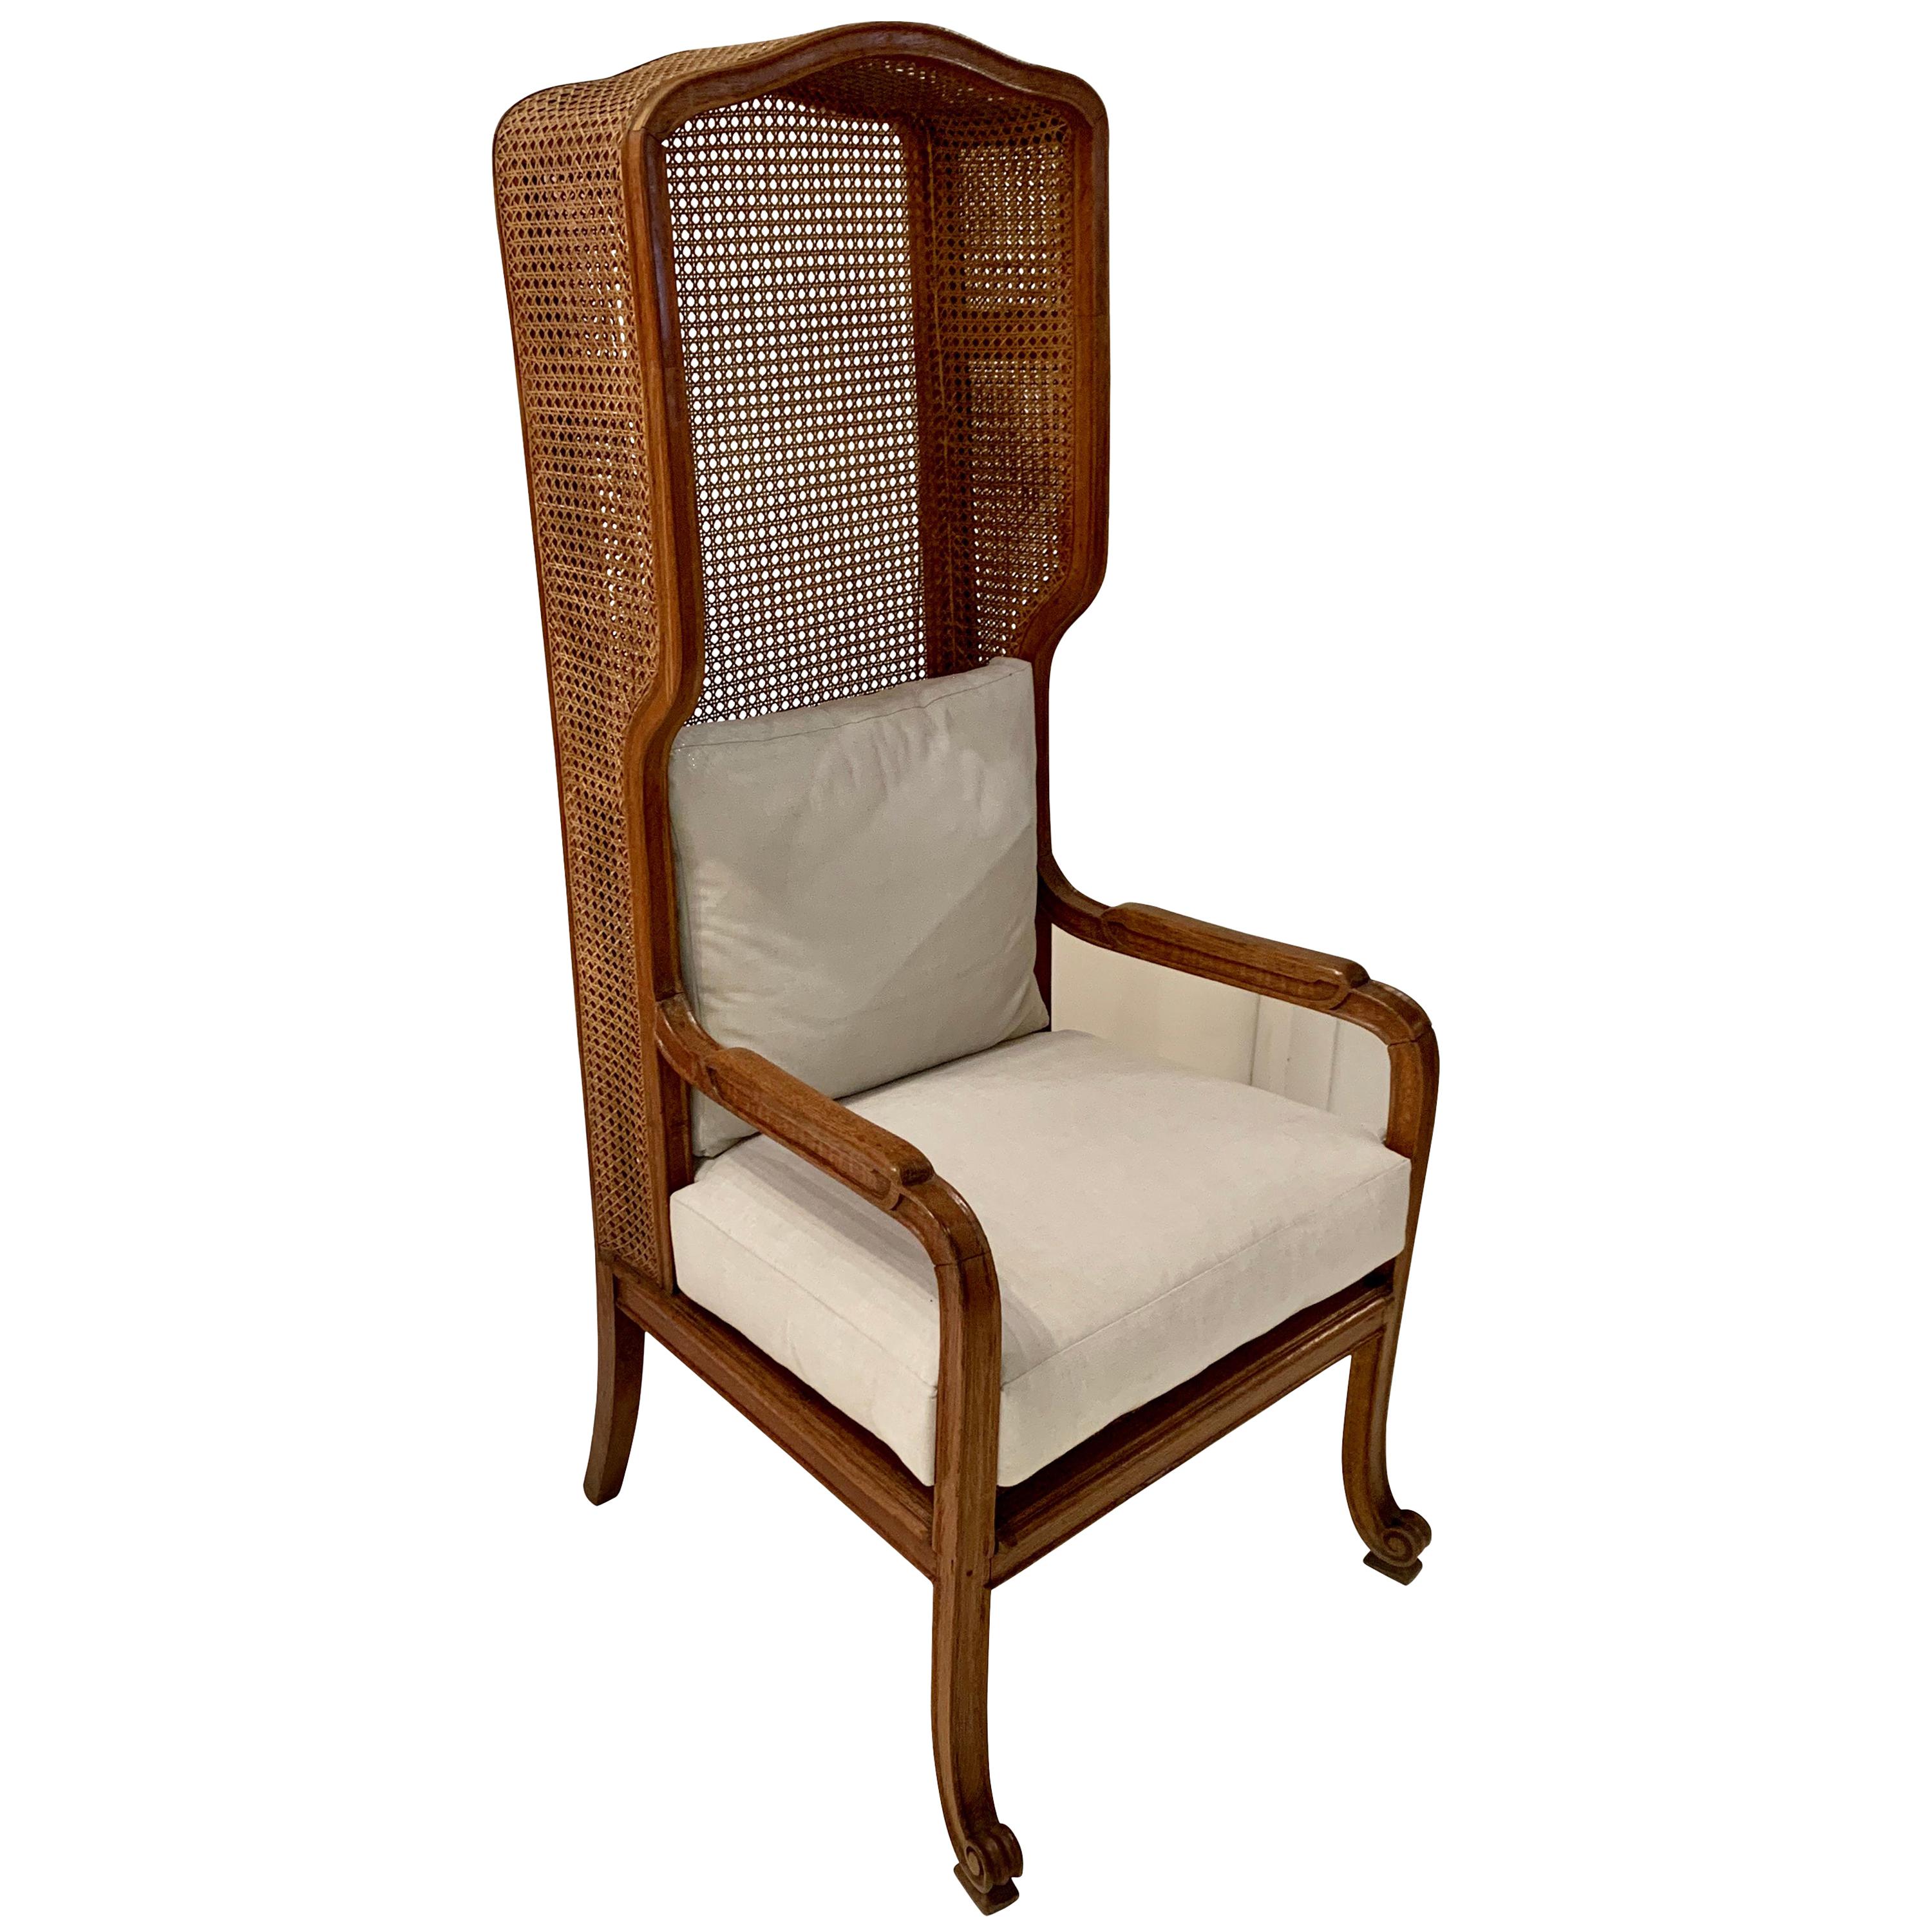 Upholstered High Back Cane Wing Chair, France, 1920s